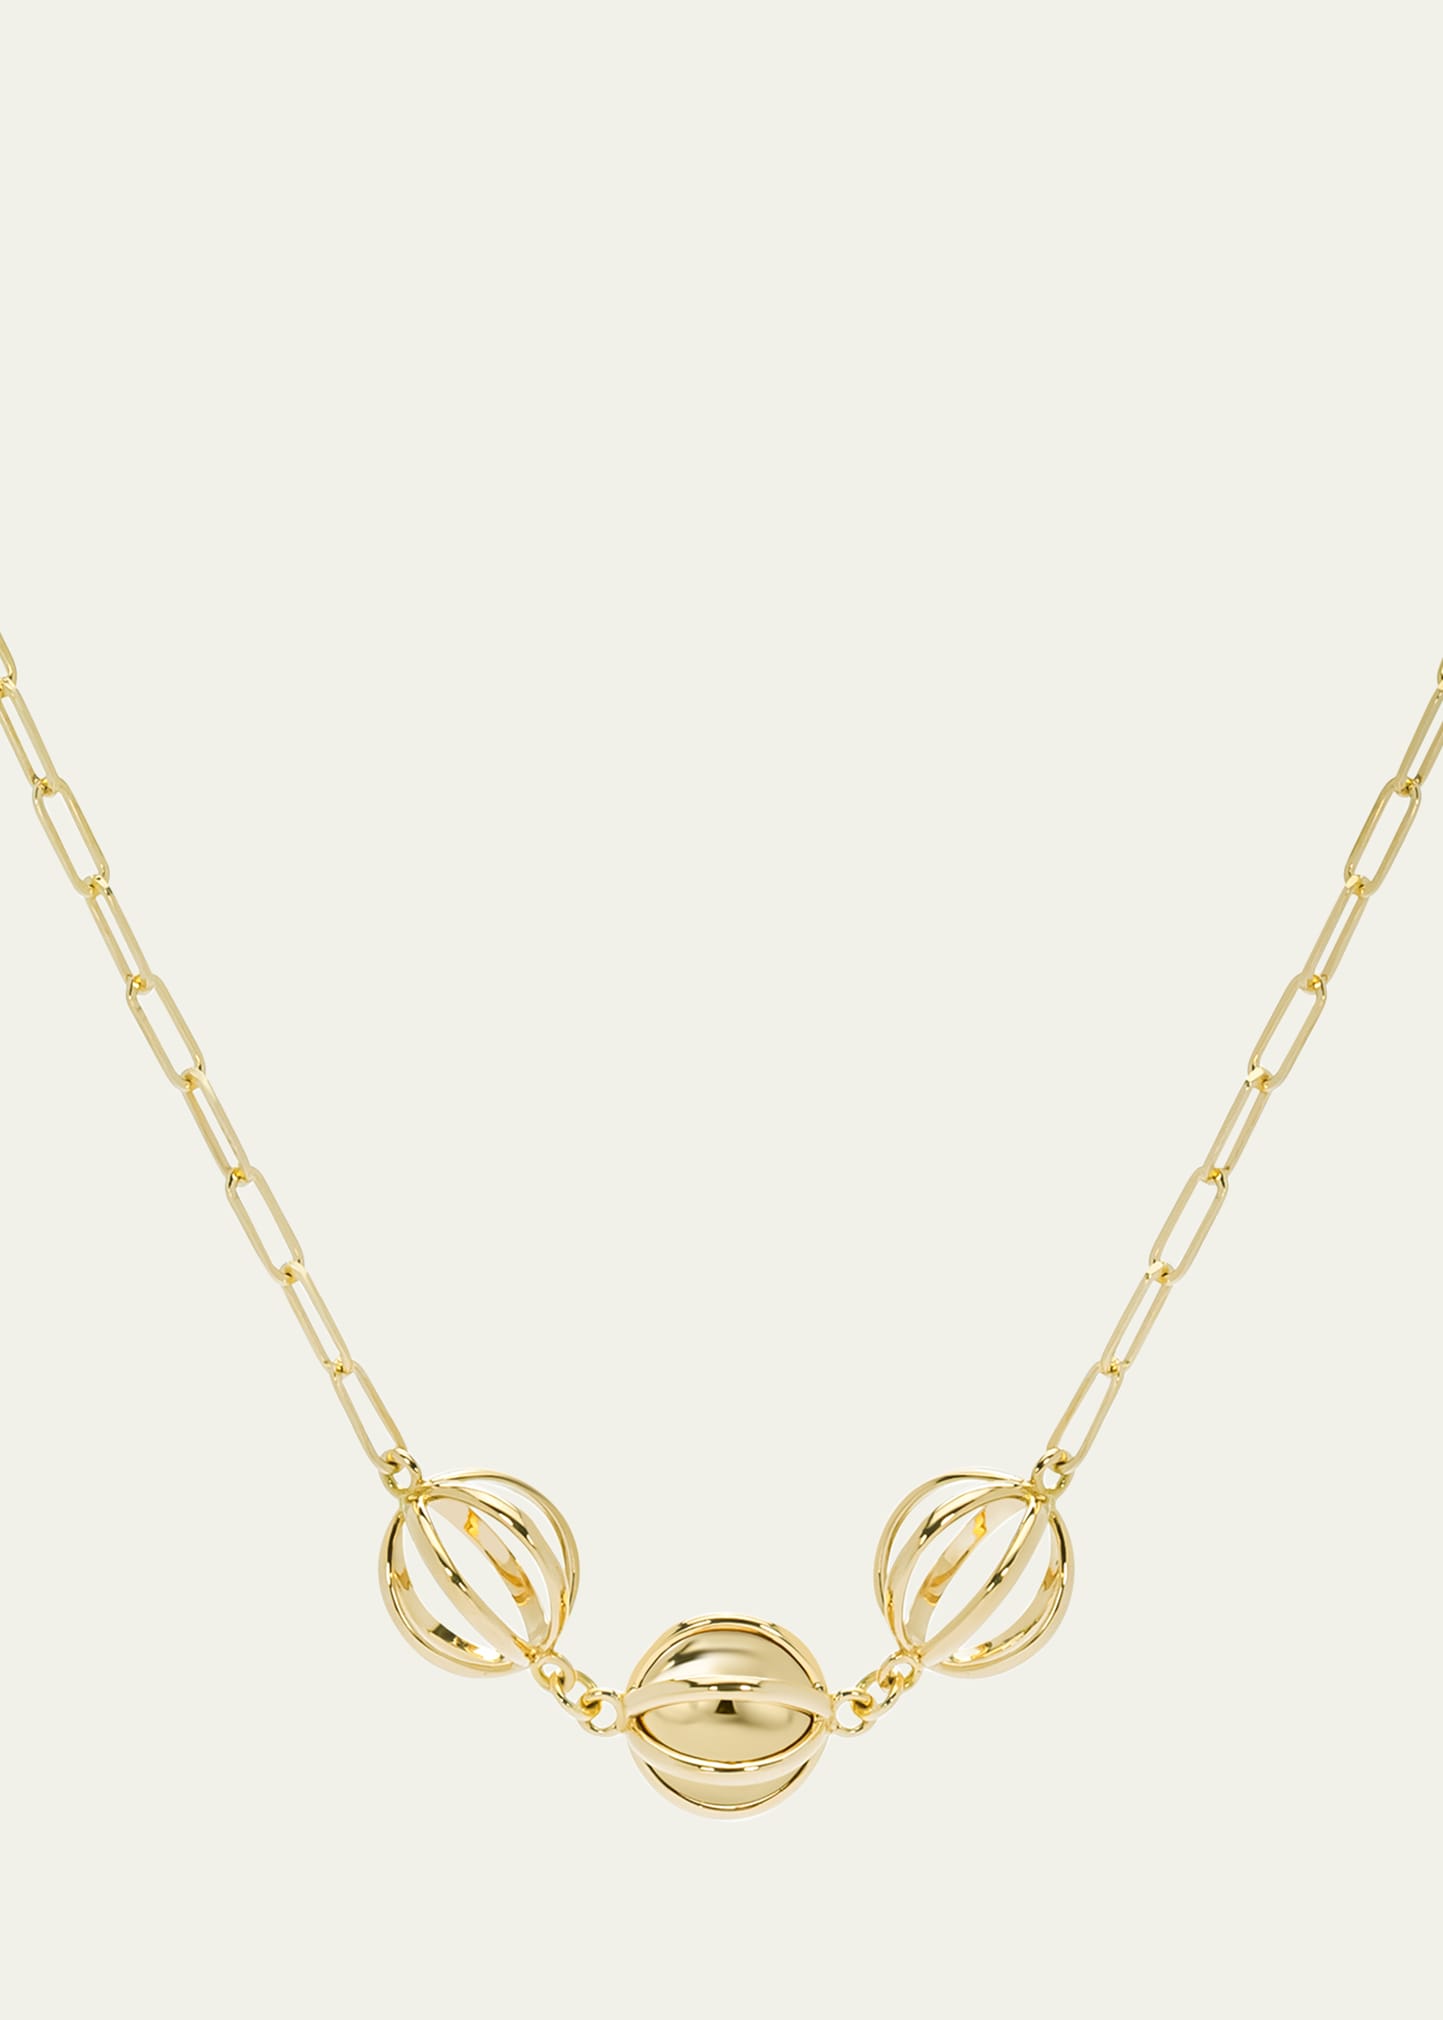 Prisma 18K Yellow Gold Paperclip Chain Necklace